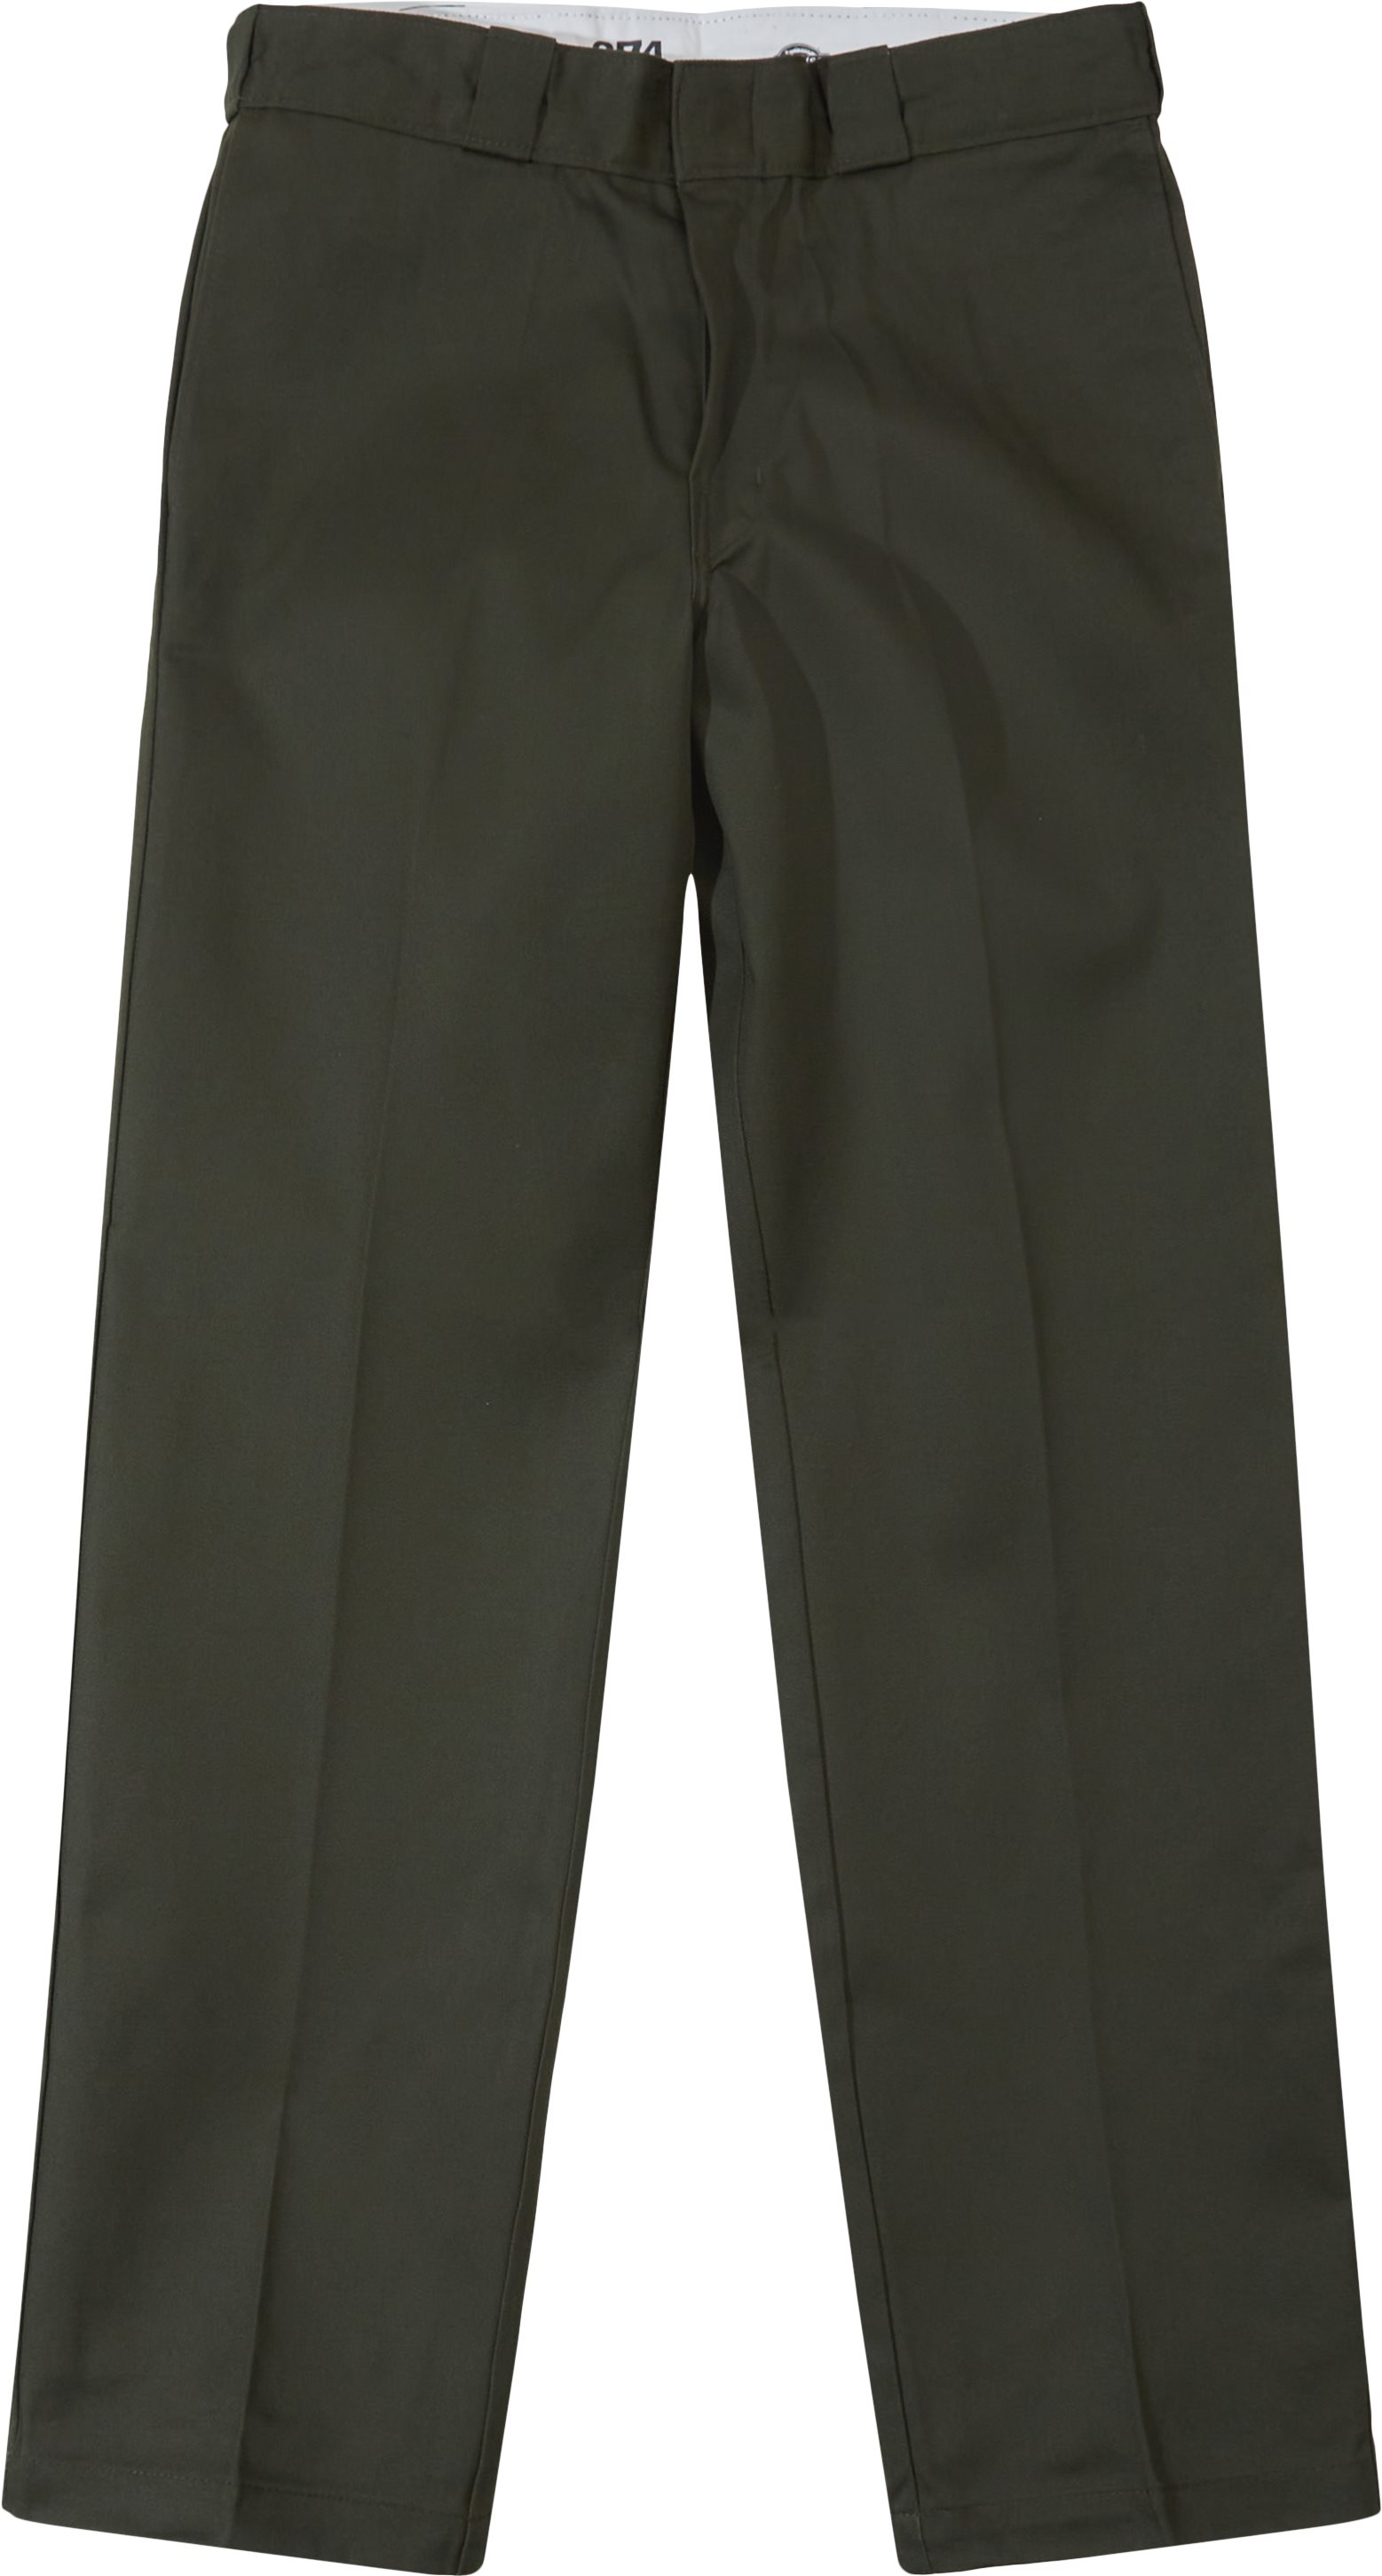 874 Work Pant - Trousers - Relaxed fit - Army